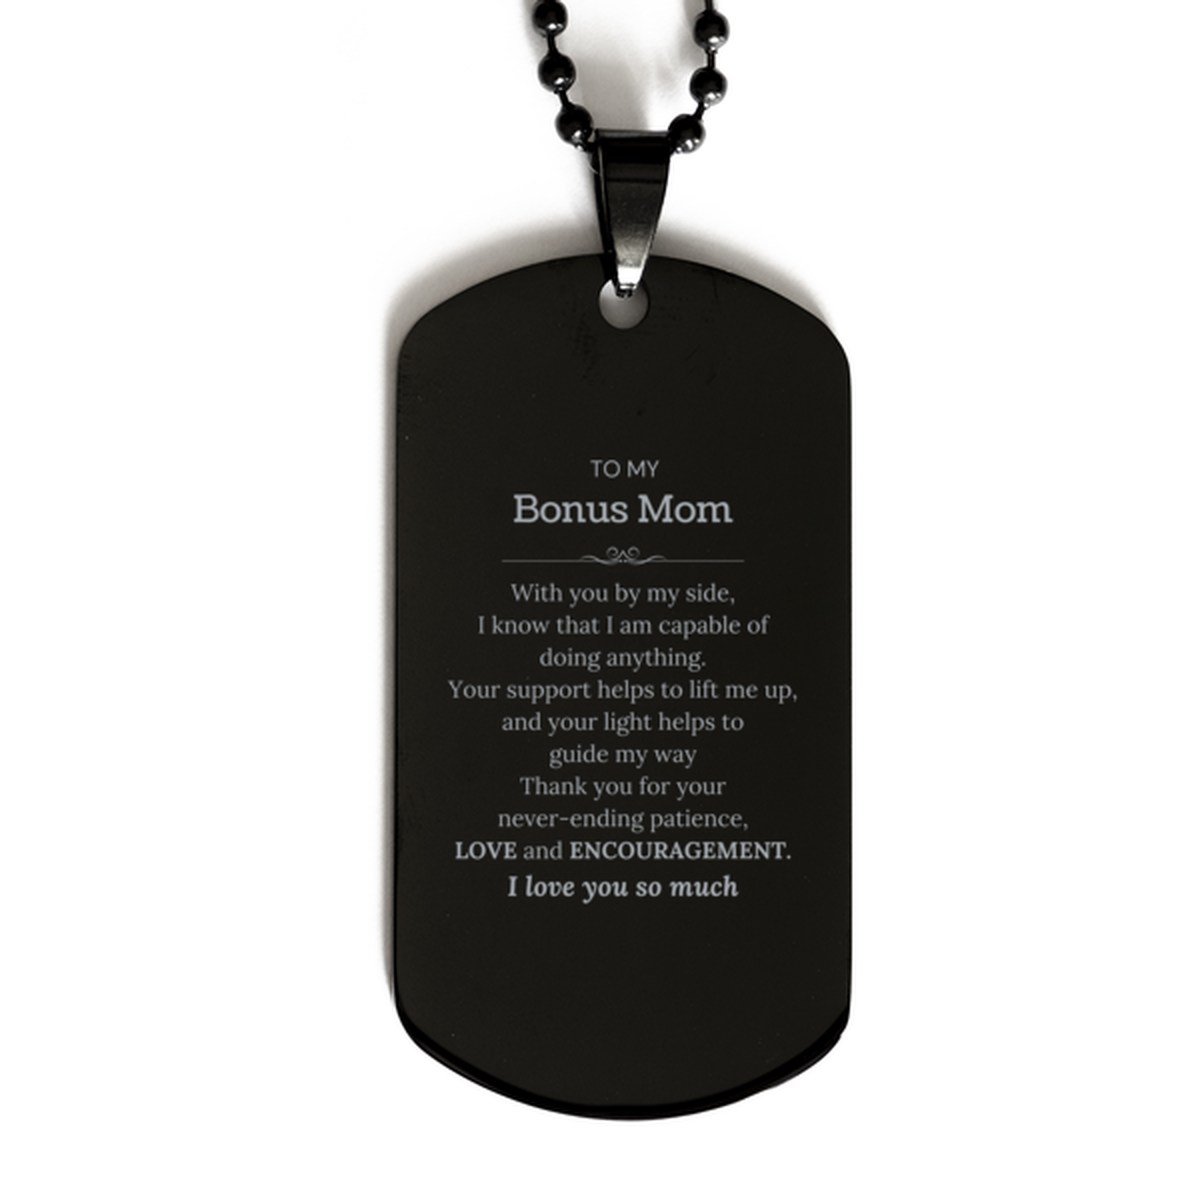 Appreciation Bonus Mom Black Dog Tag Gifts, To My Bonus Mom Birthday Christmas Wedding Keepsake Gifts for Bonus Mom With you by my side, I know that I am capable of doing anything. I love you so much